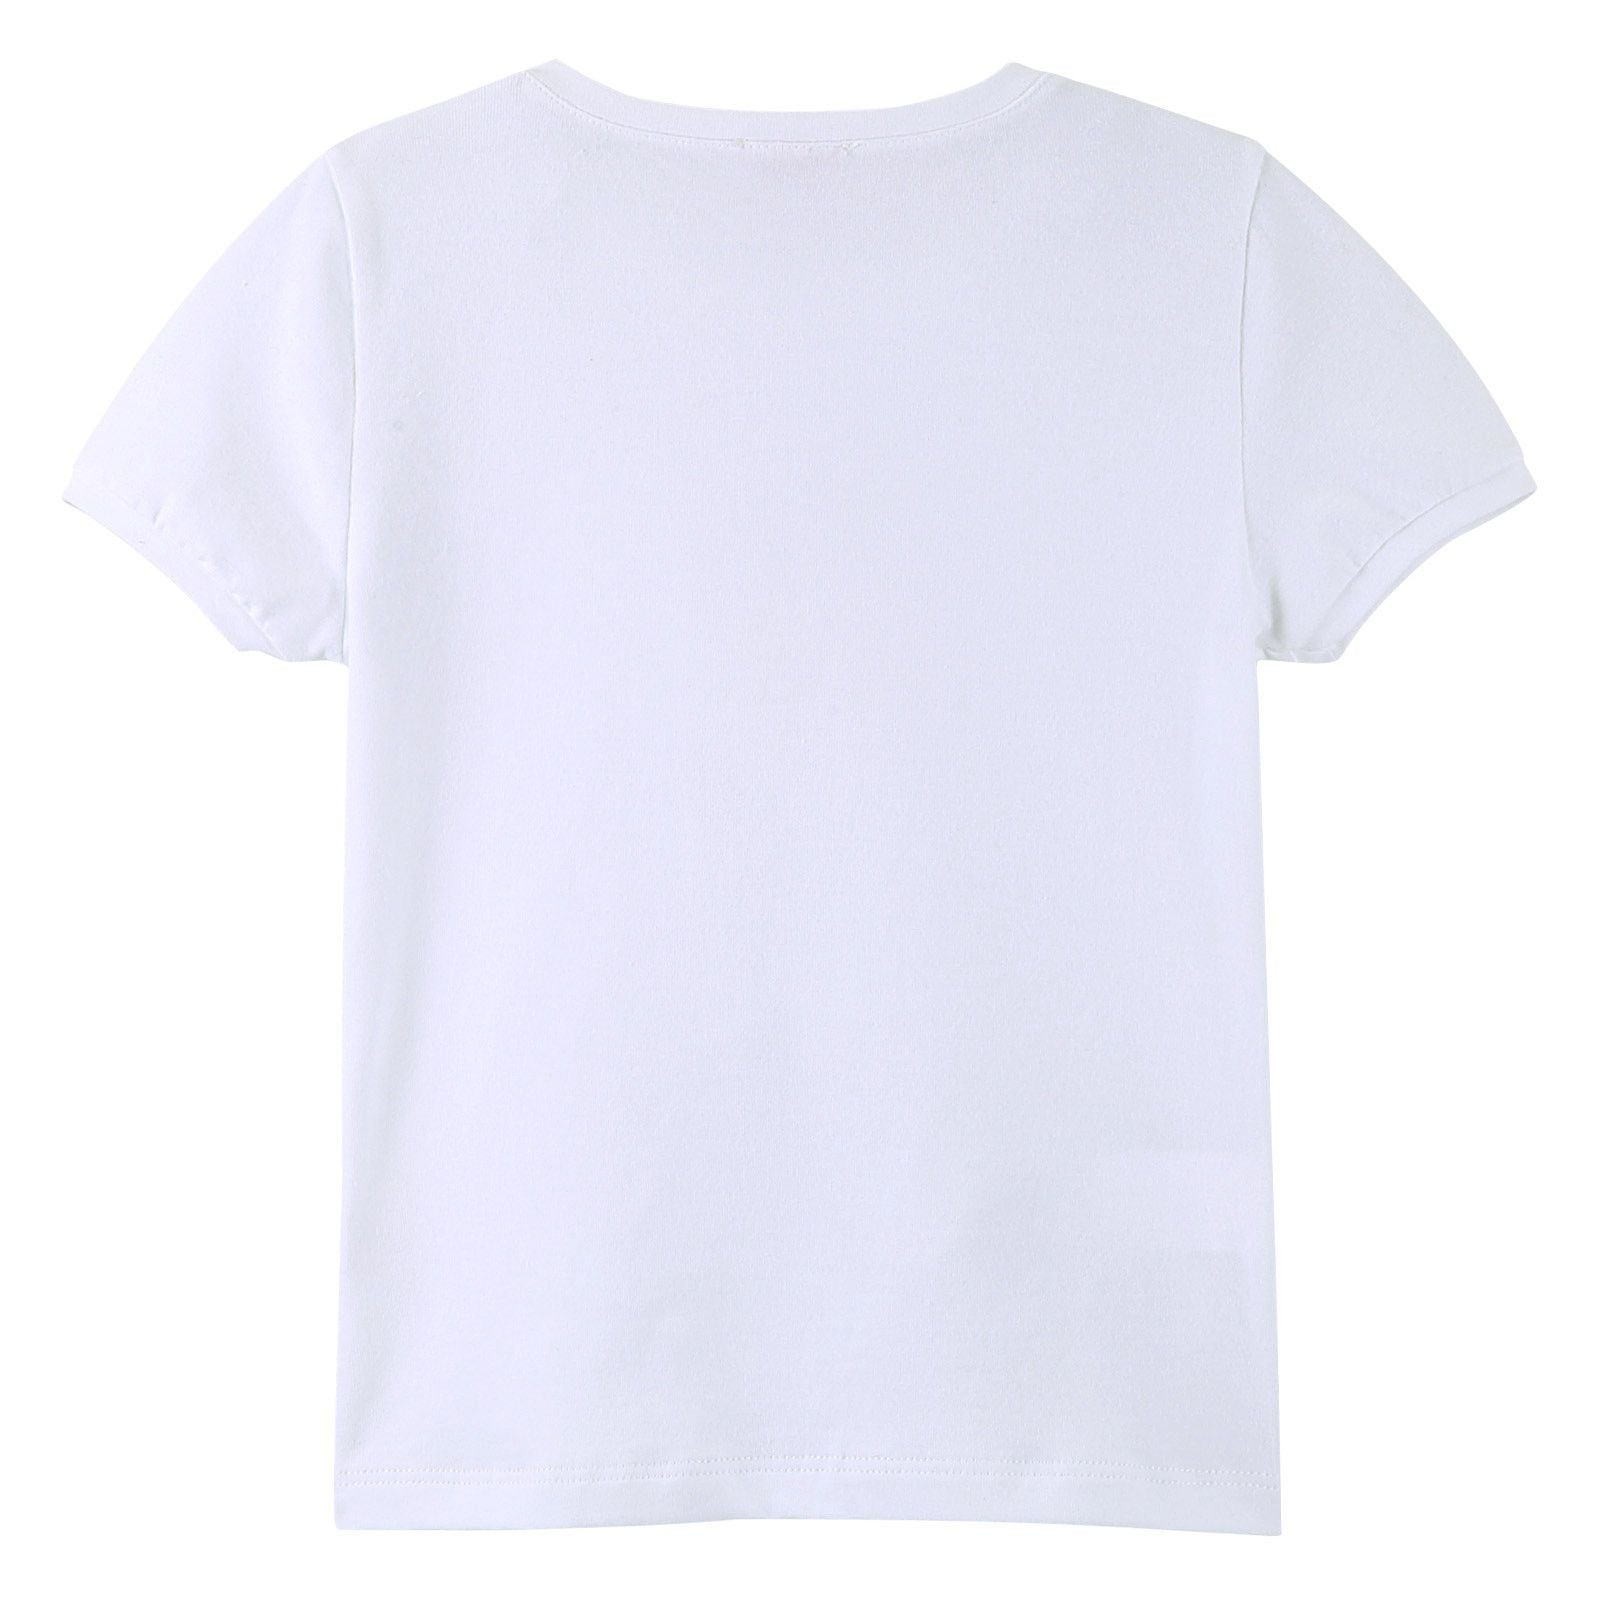 Girls White Fairy Printed T-Shirt With Ribbed Cuffs - CÉMAROSE | Children's Fashion Store - 2